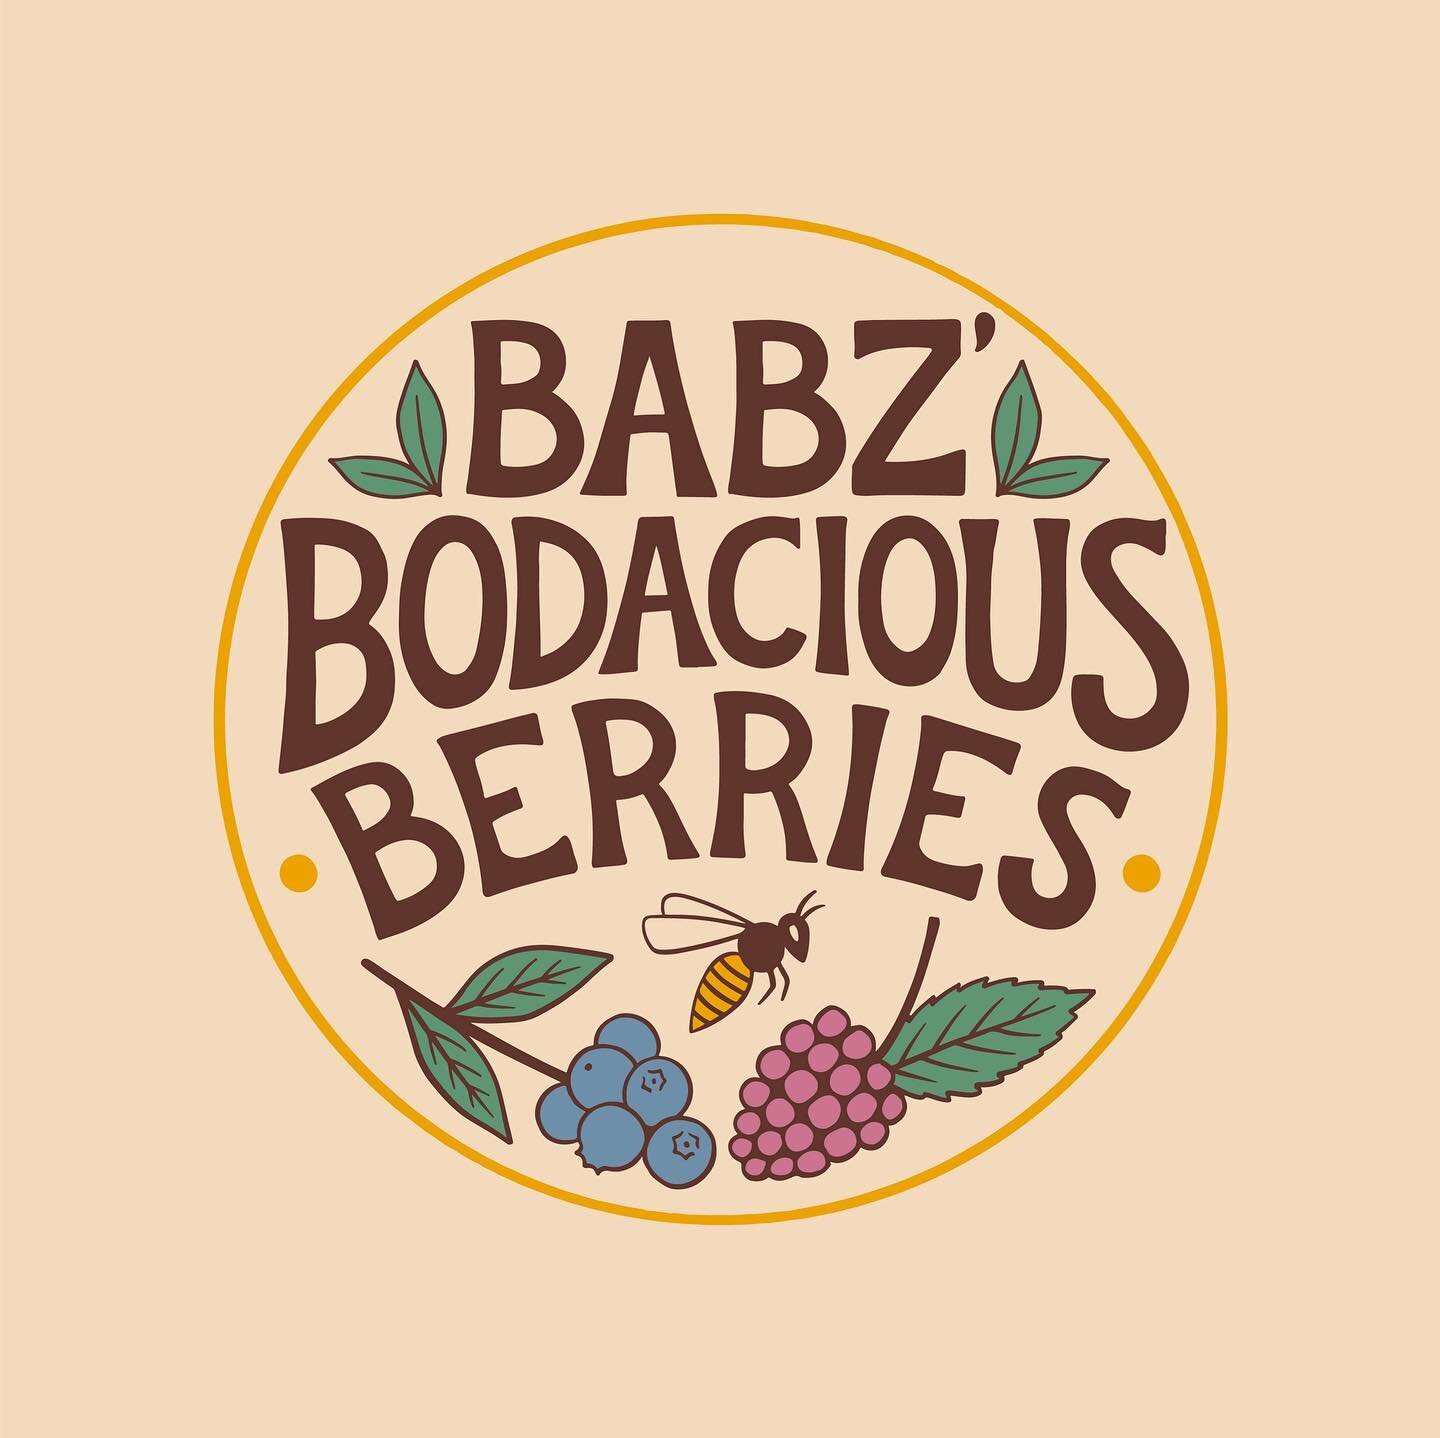 When we decided to start farming in 2006, our intention was to be berry farmers and call our product Babz&rsquo; Bodacious Berries.  Listening to experienced berry growers, we learned the wisdom of checking our soil for certain nematodes before plant